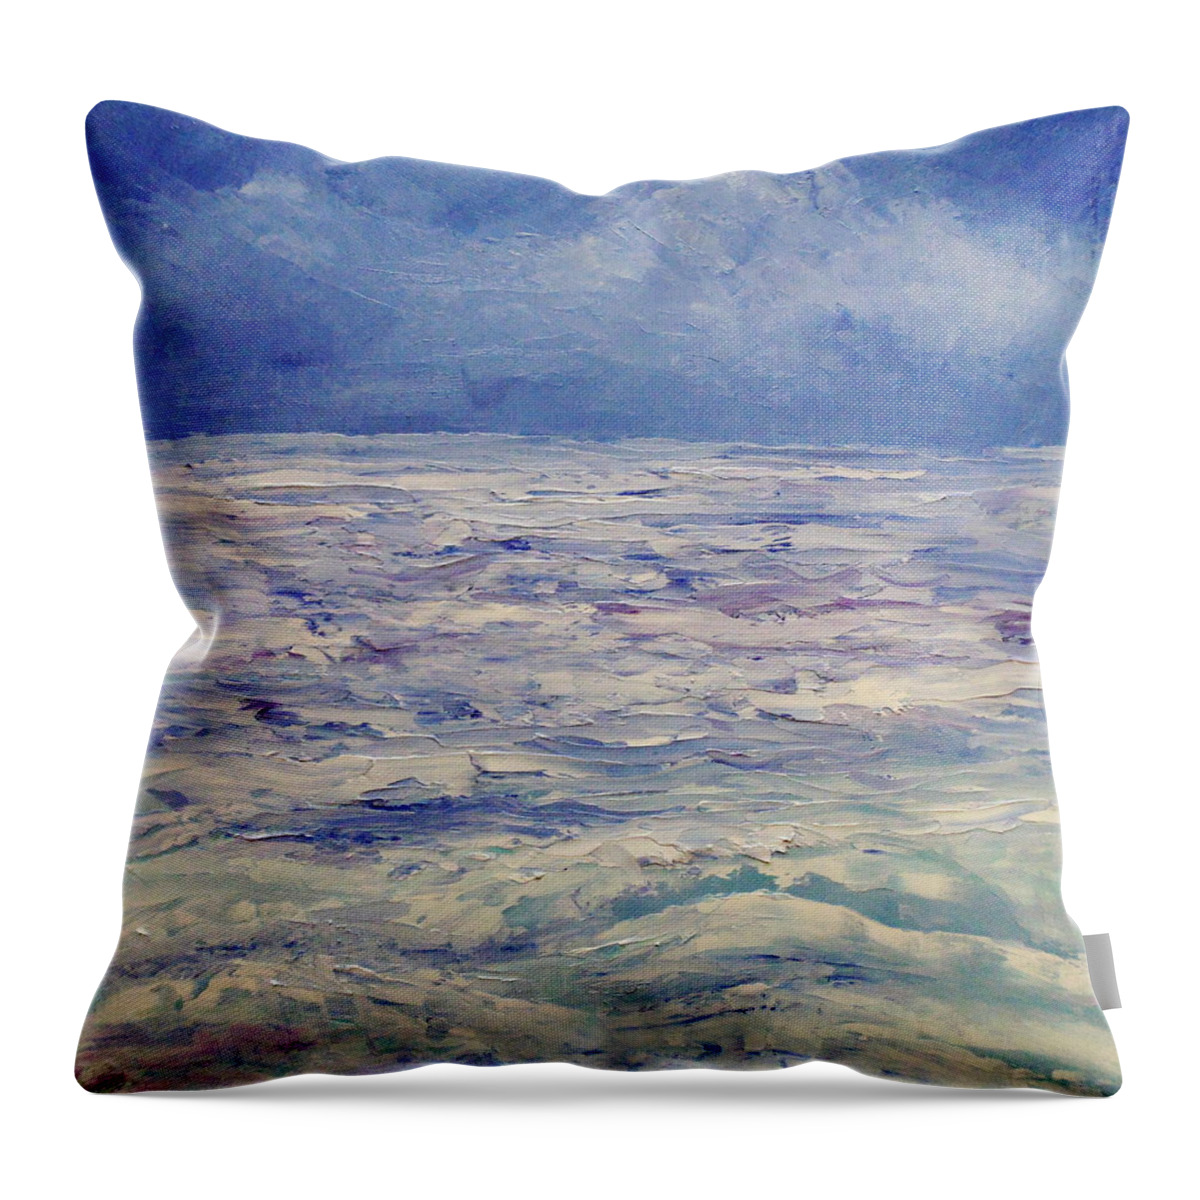 Seascape Throw Pillow featuring the painting Moonlight Offshore by Angeles M Pomata